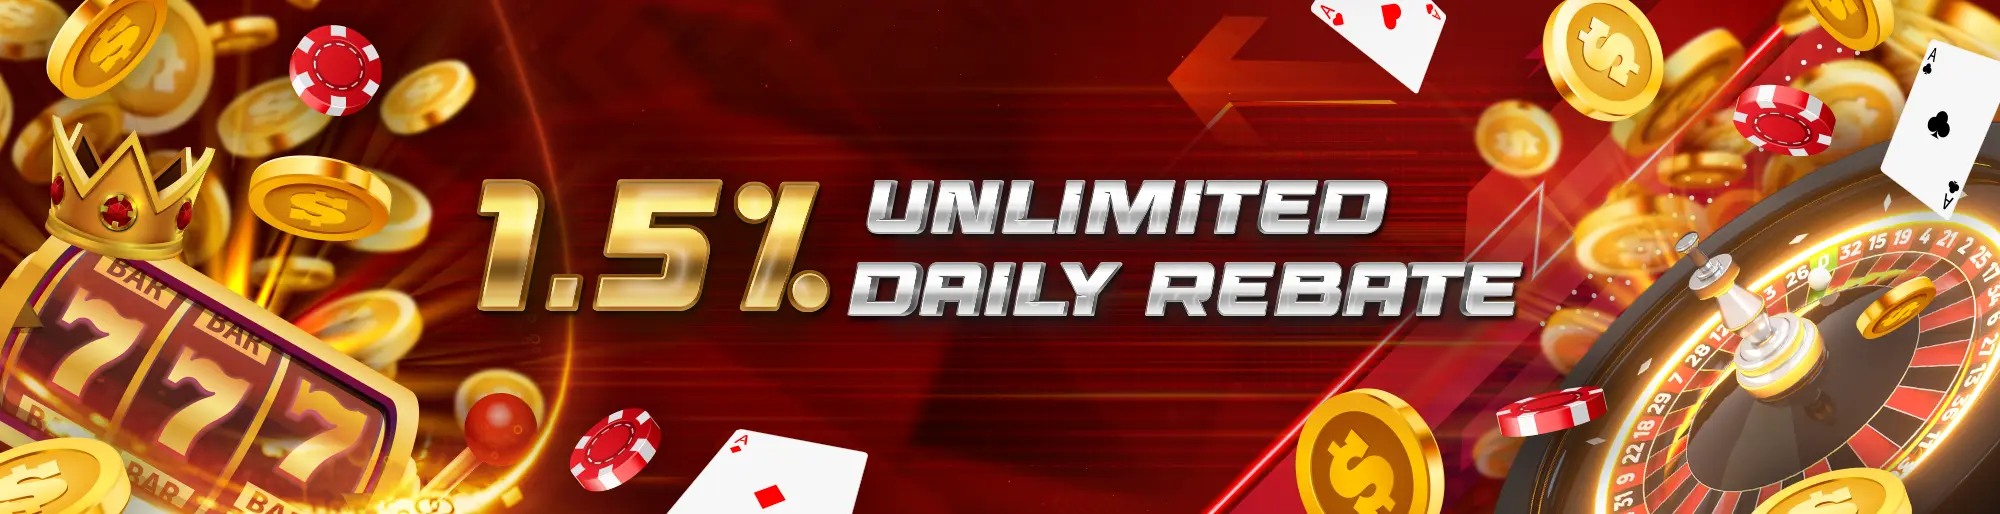 Unlimited Daily Rebate Banner